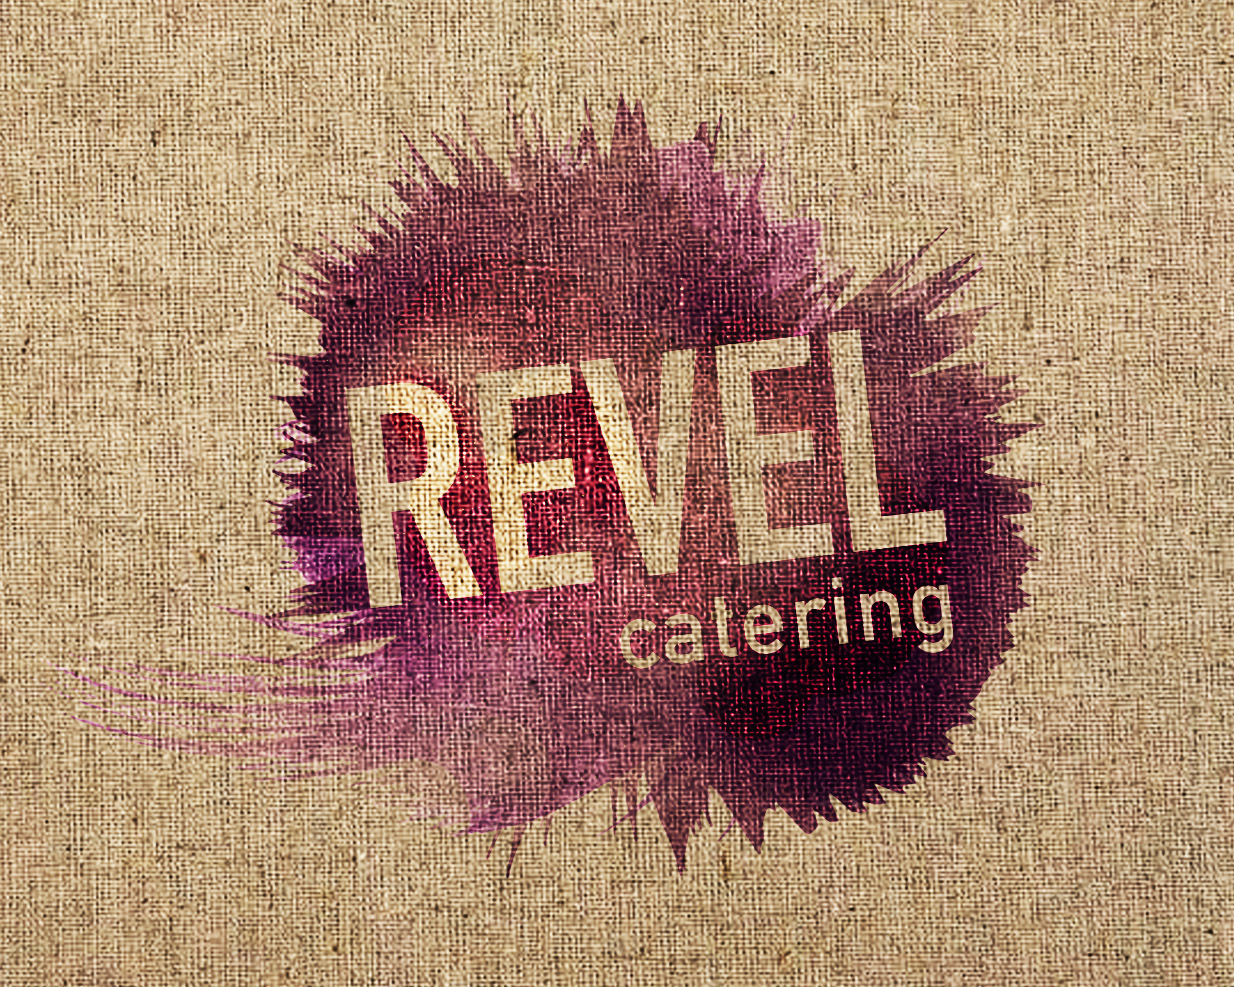 The Revel logo, which is wine smudge with the words 'Revel Catering' inside of it